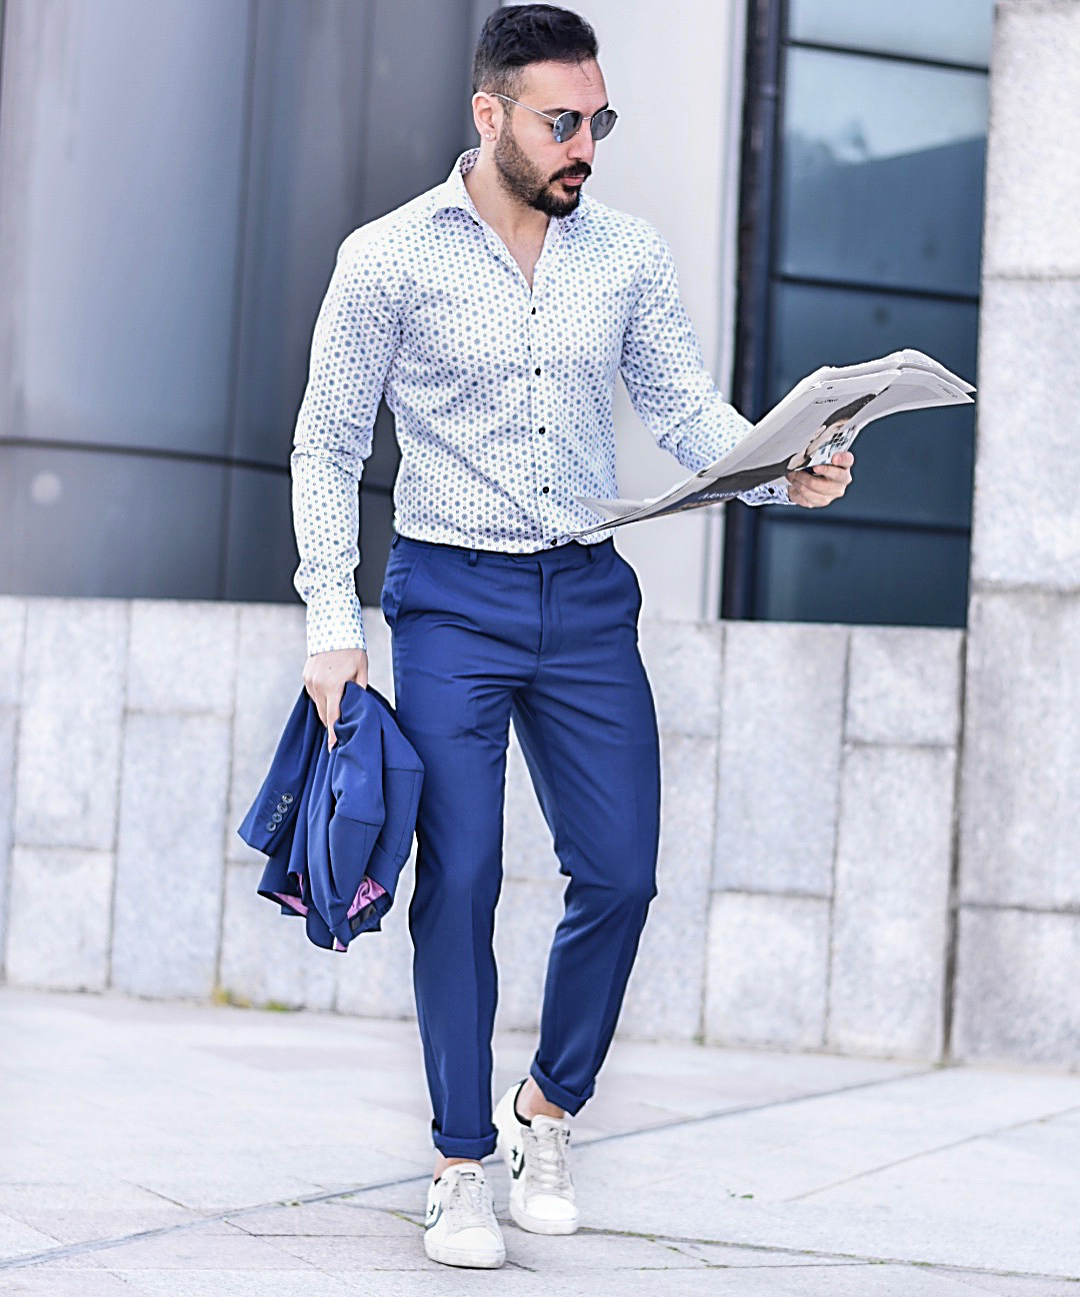 Men's Blue Suit, White and Blue Print Long Sleeve Shirt, White Leather Low  Top Sneakers, Blue Sunglasses | Lookastic